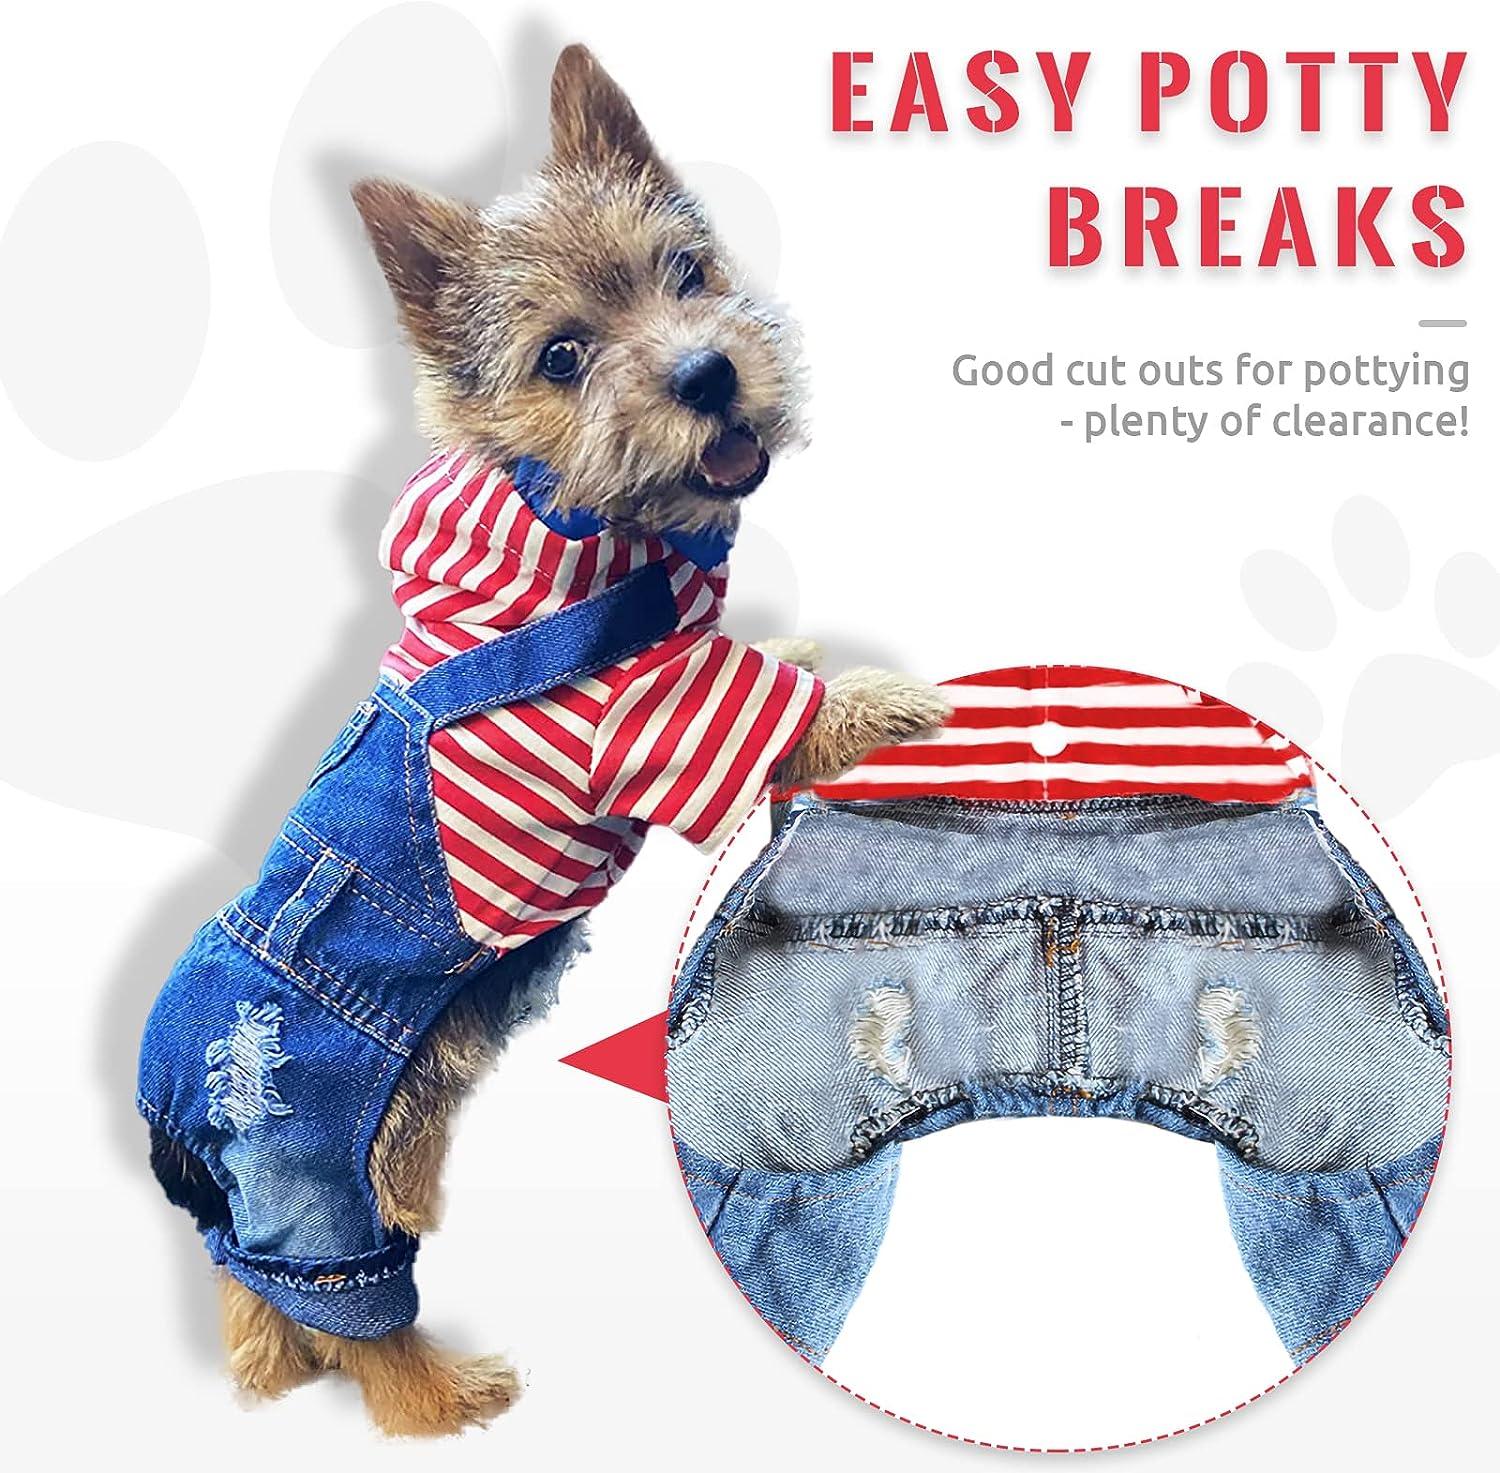 New Arrival! Pet Dog Apparel Pet Dog Denim Trousers Suspender Trousers Bib  Overalls Overalls Braces Lovely Jeans Rompers From Anod888, $6.04 |  DHgate.Com